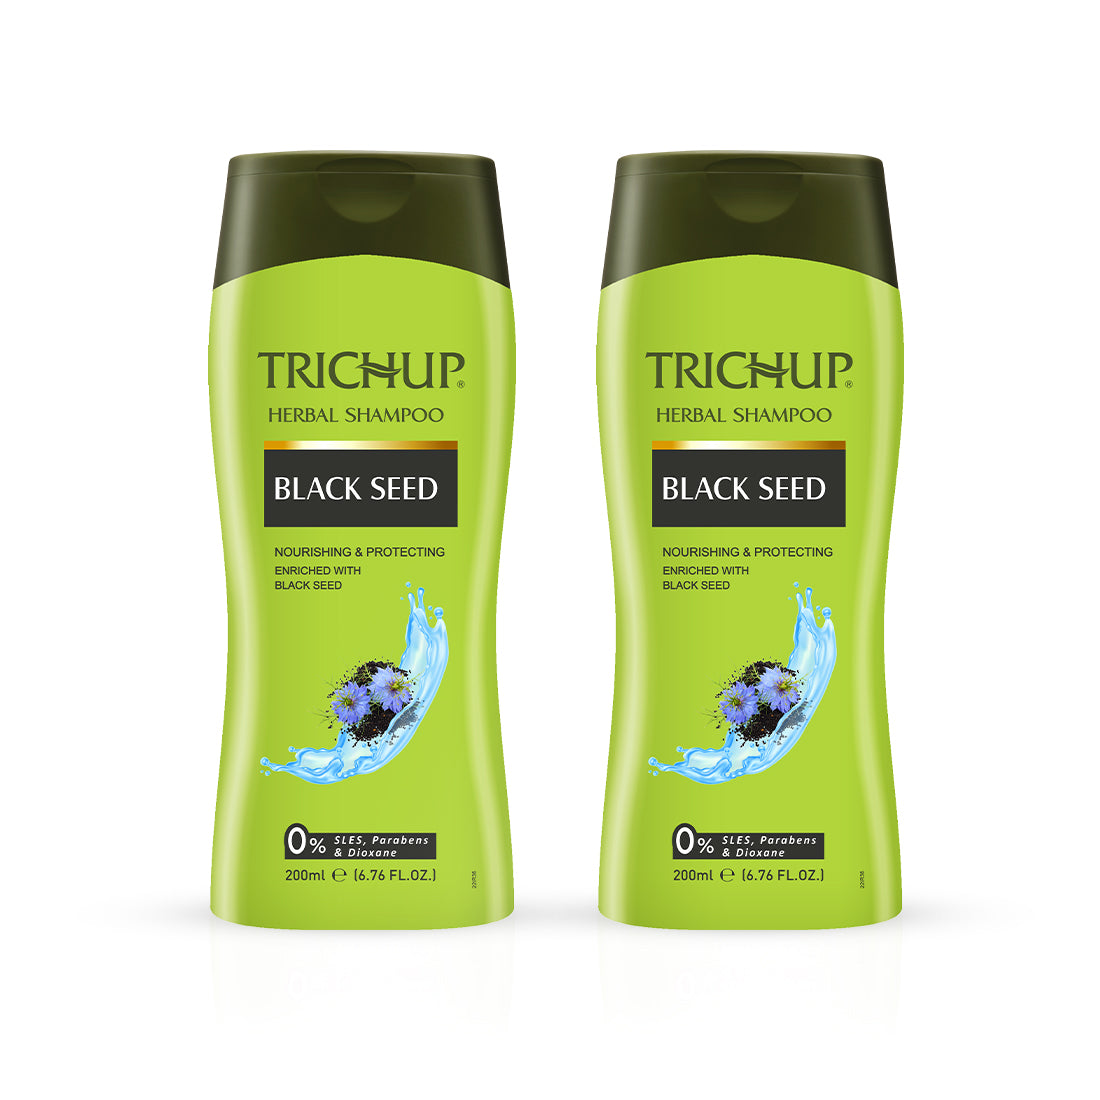 Trichup Black Seed Herbal Shampoo - Prevent Premature Greying of Your Hair - Gently Cleanses, Nourishes, Strengthen & Preserve Elasticity to Promote Healthy Hair - 200ml (Pack of 2)